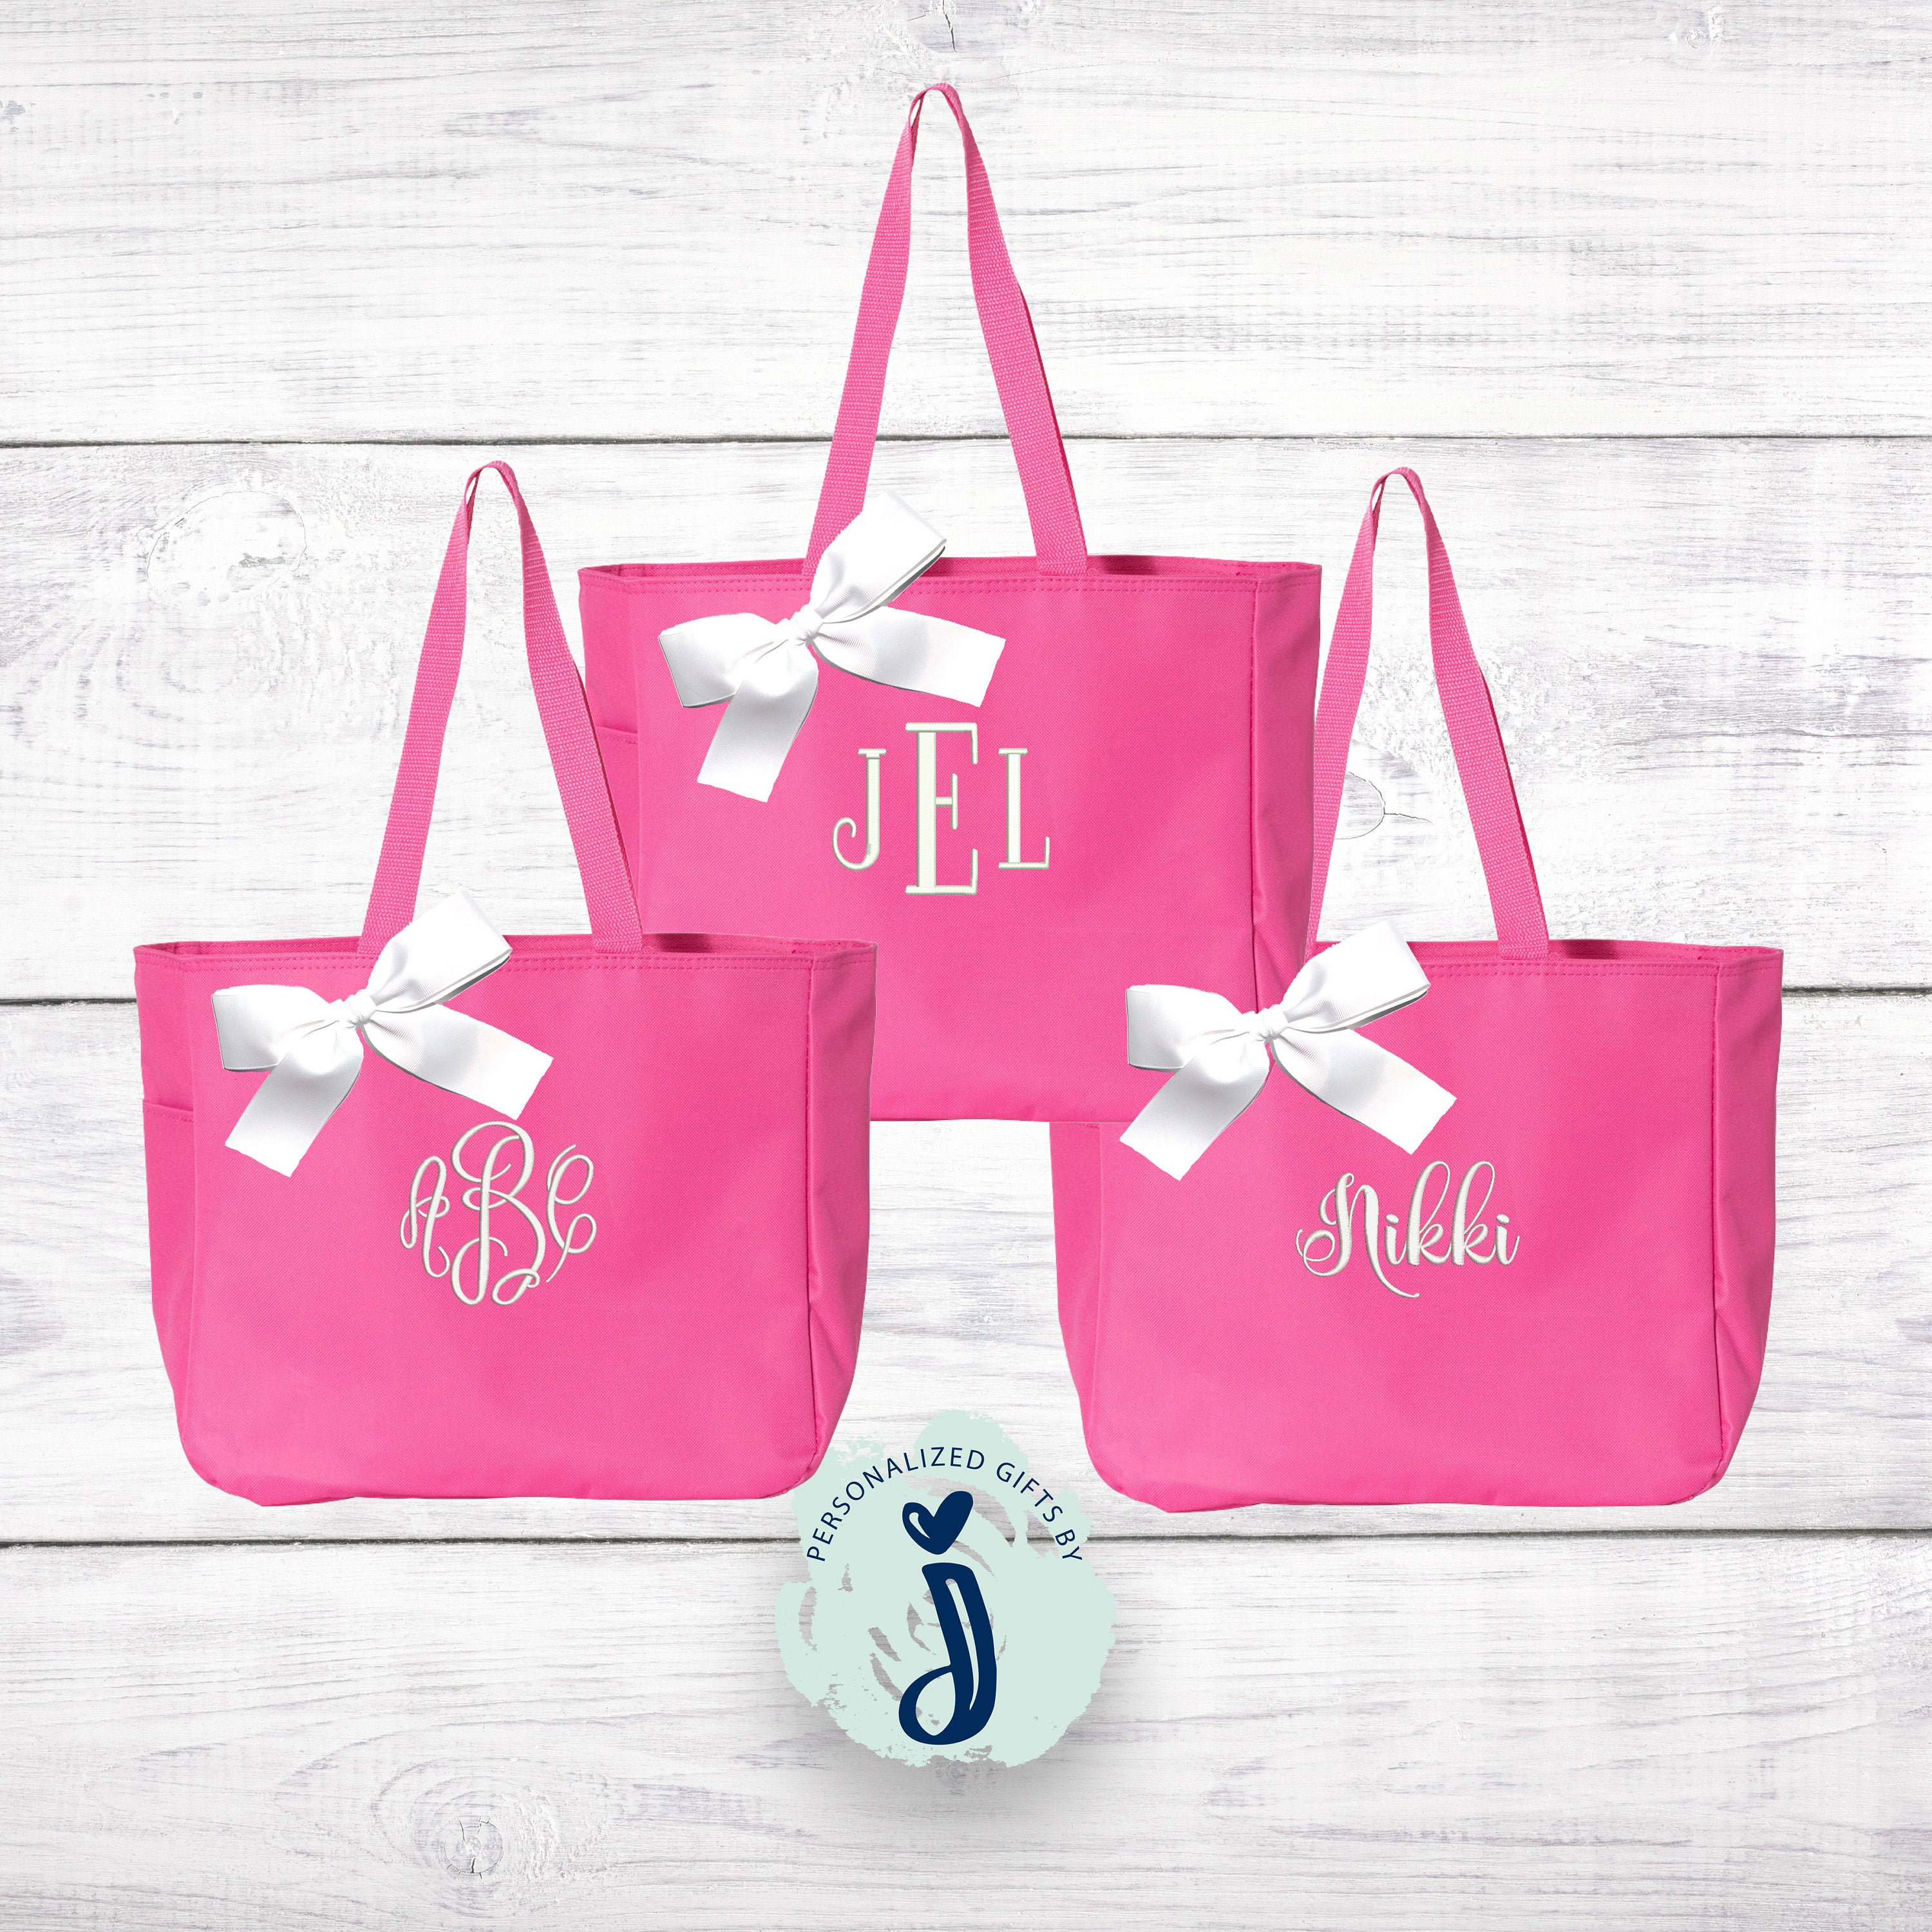 Custom Tote Bags | Personalized Bags | 1800Flowers